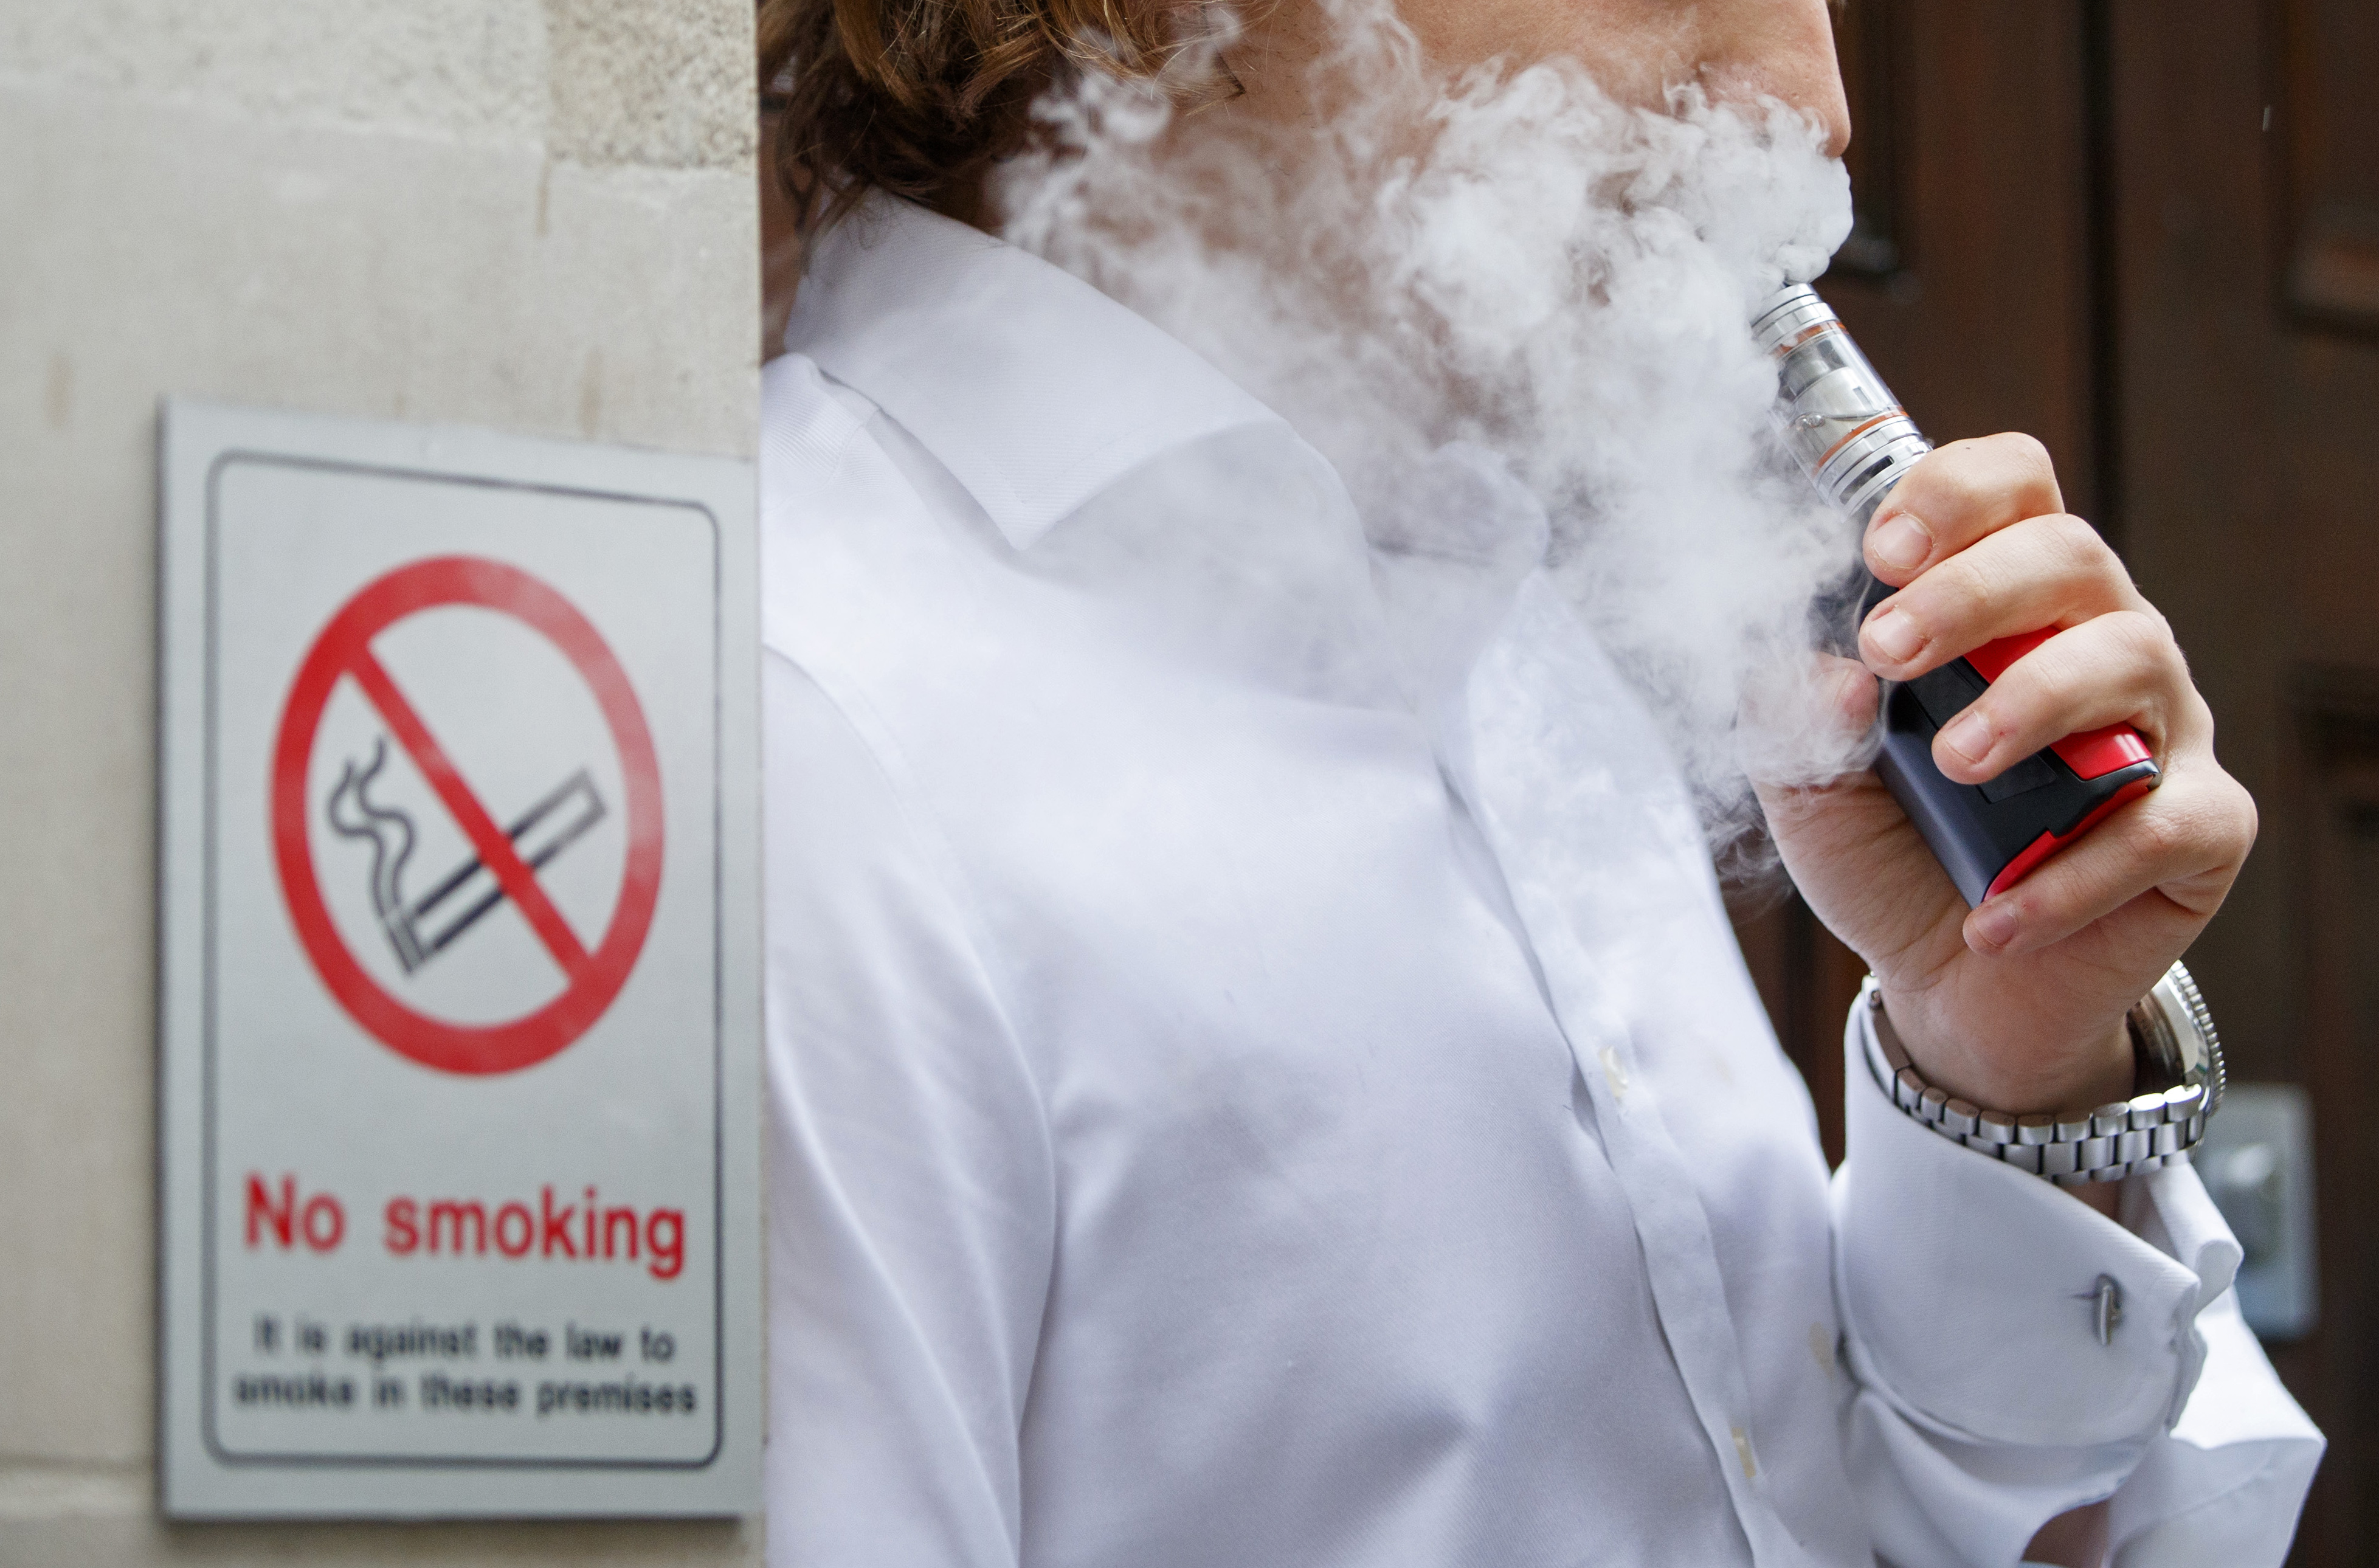 Vaping Is Better Than Smoking, And Could Save Tobacco Users’ Lives, Study Finds